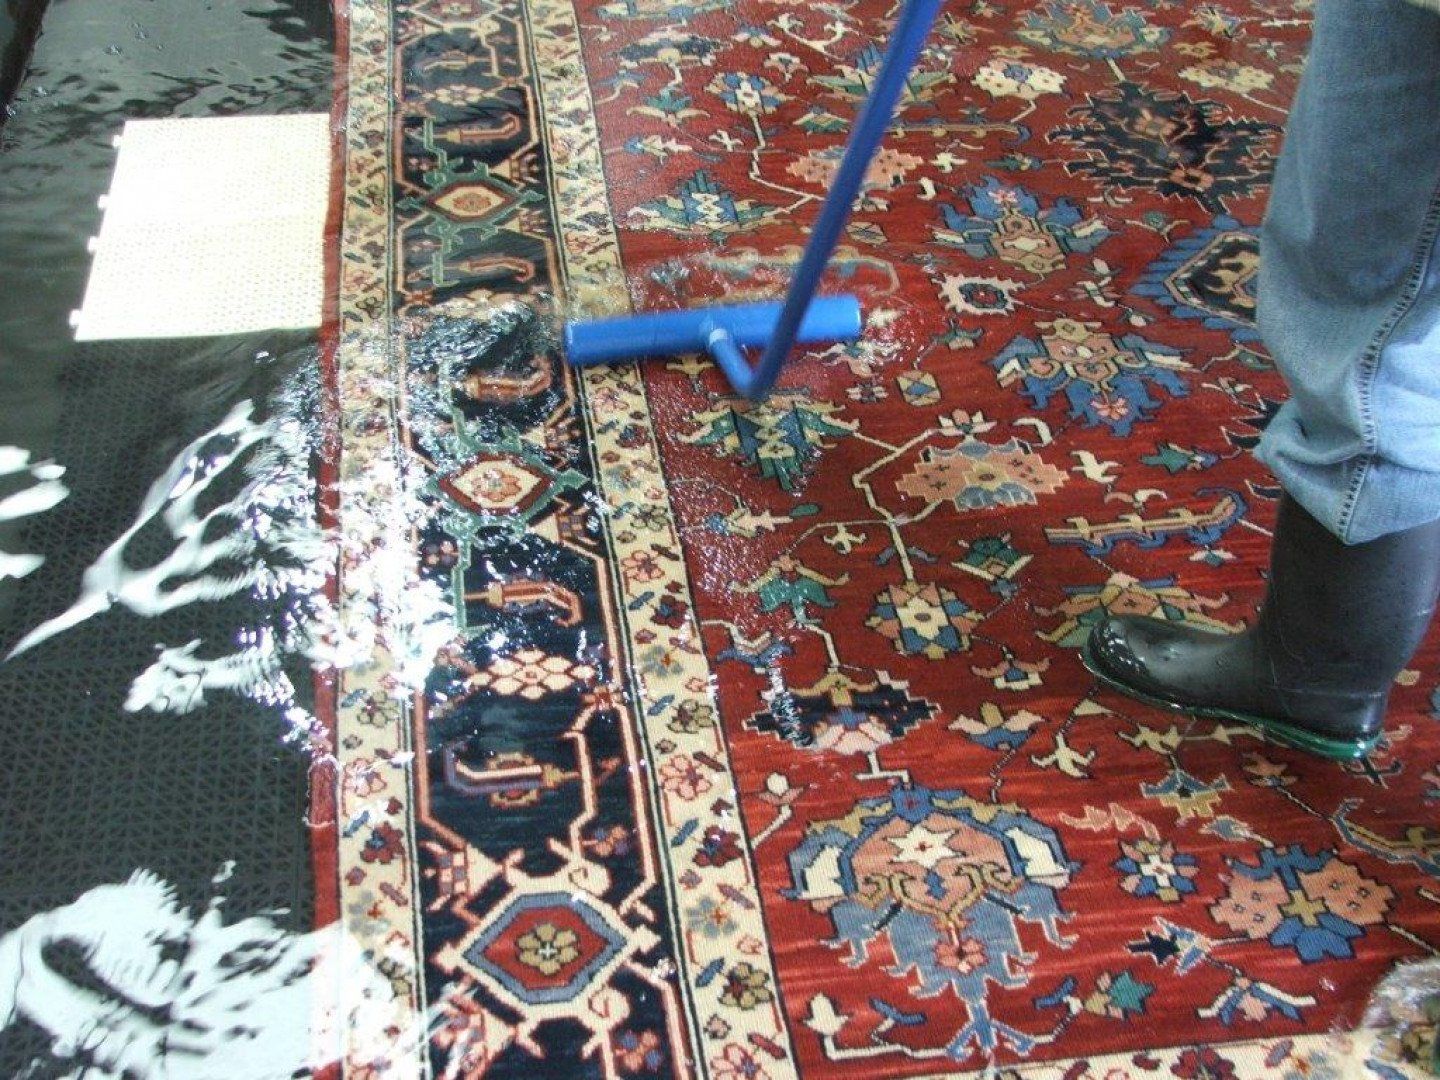 Rug pit cleaning